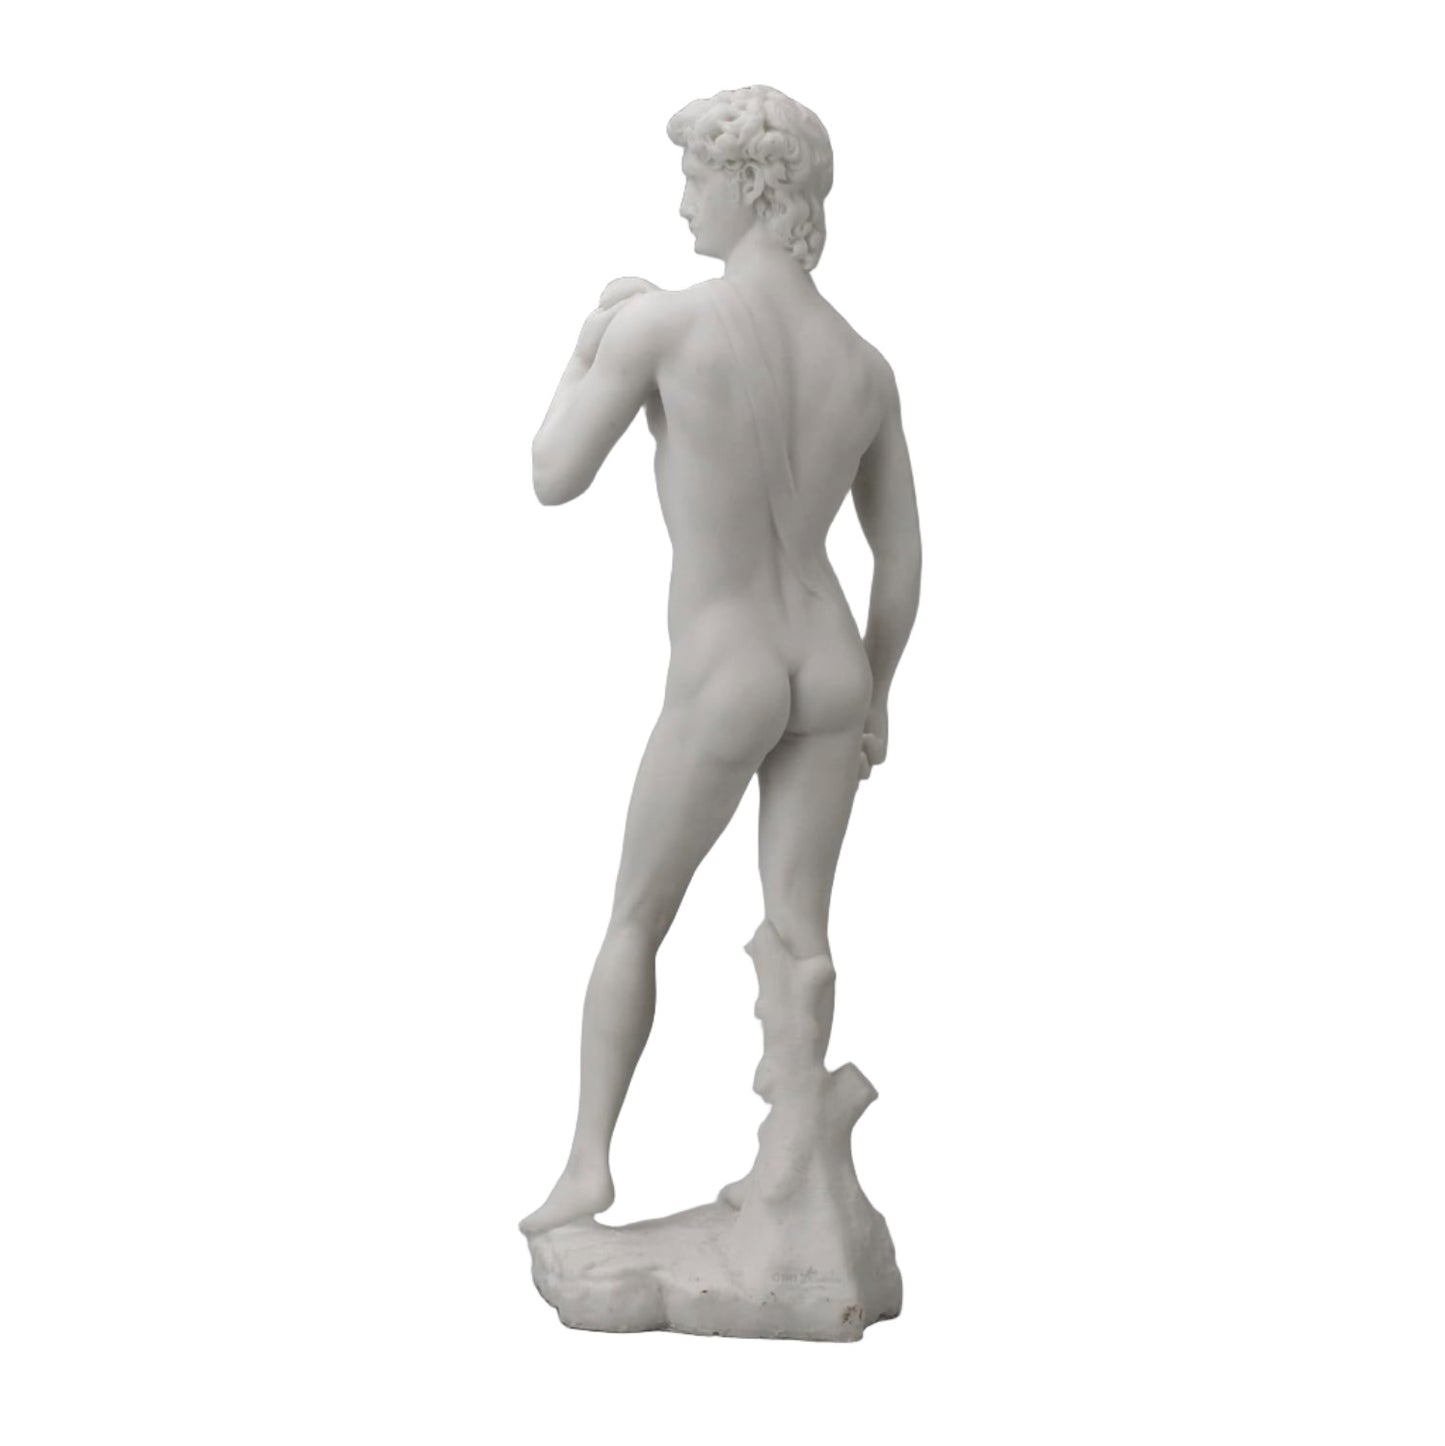 The David by Michelangelo Resin with Marble Finish 13" Statue